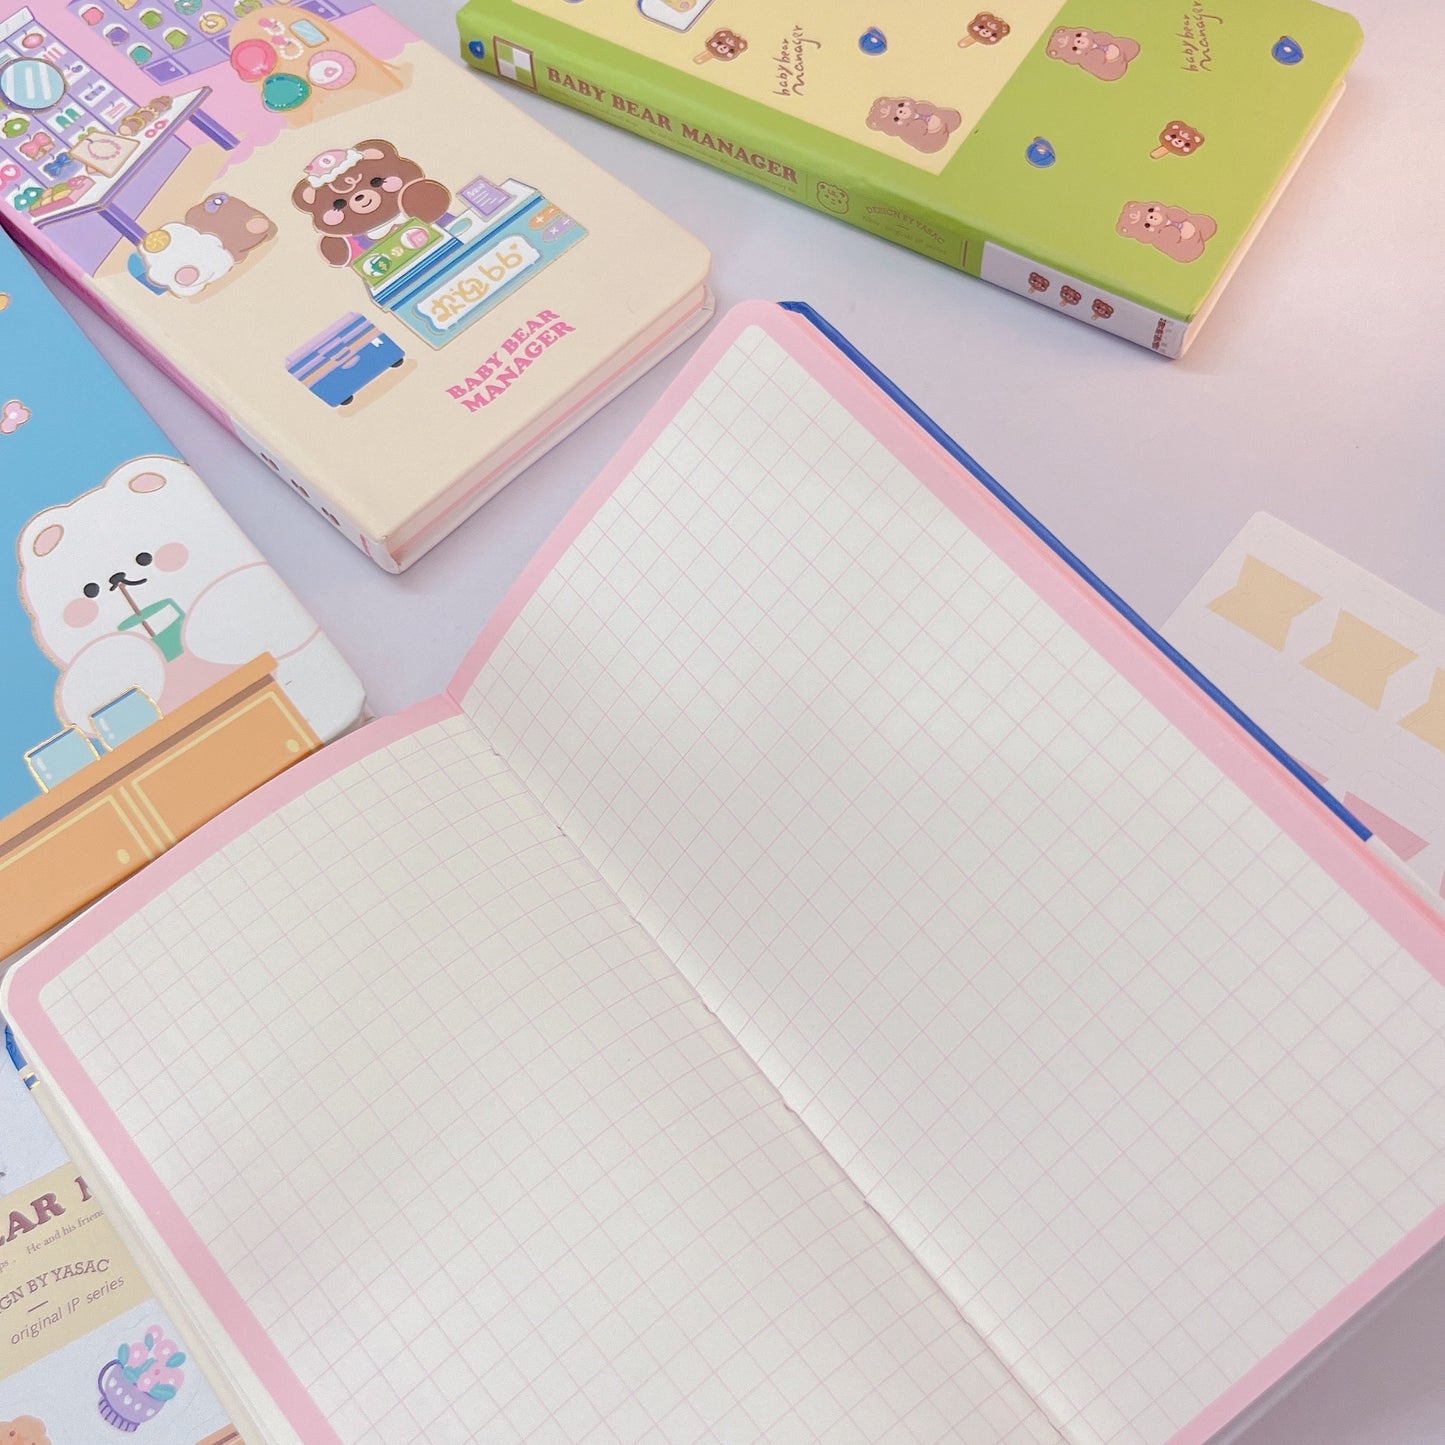 Baby Bear Kawaii Planner with sticker sheets